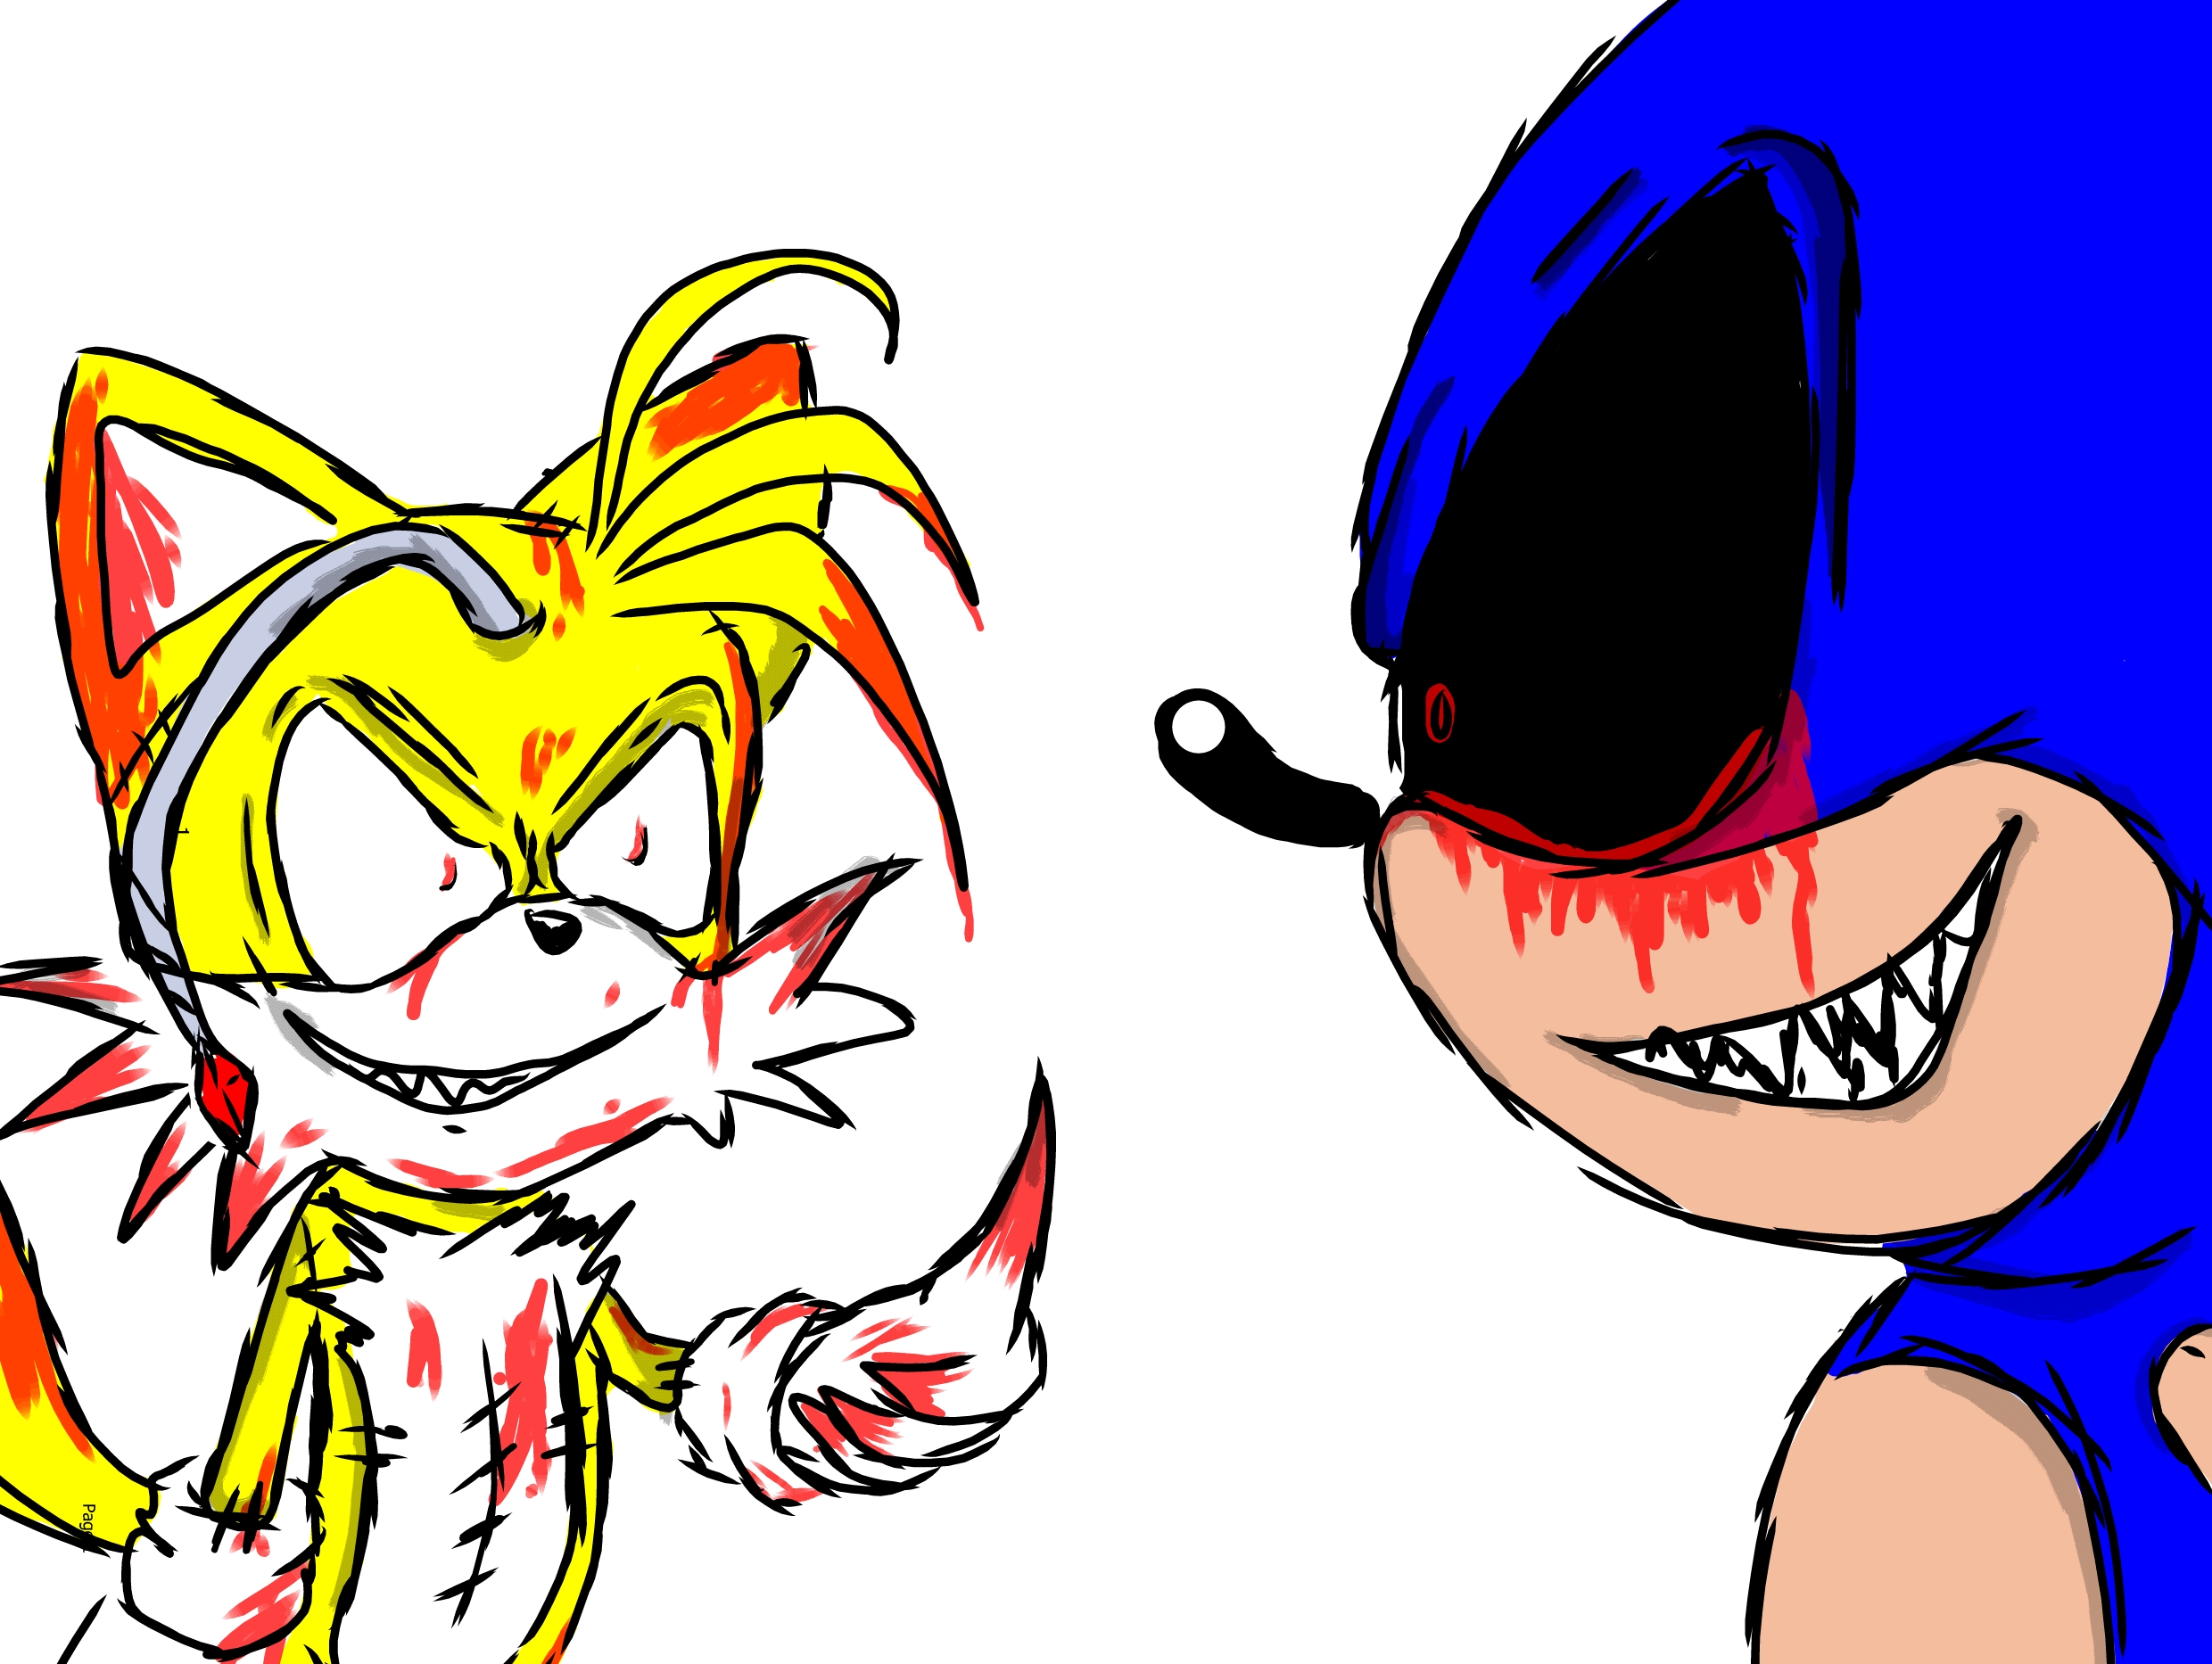 Sonic.exe x Tails.exe by Creepypastera1 on DeviantArt